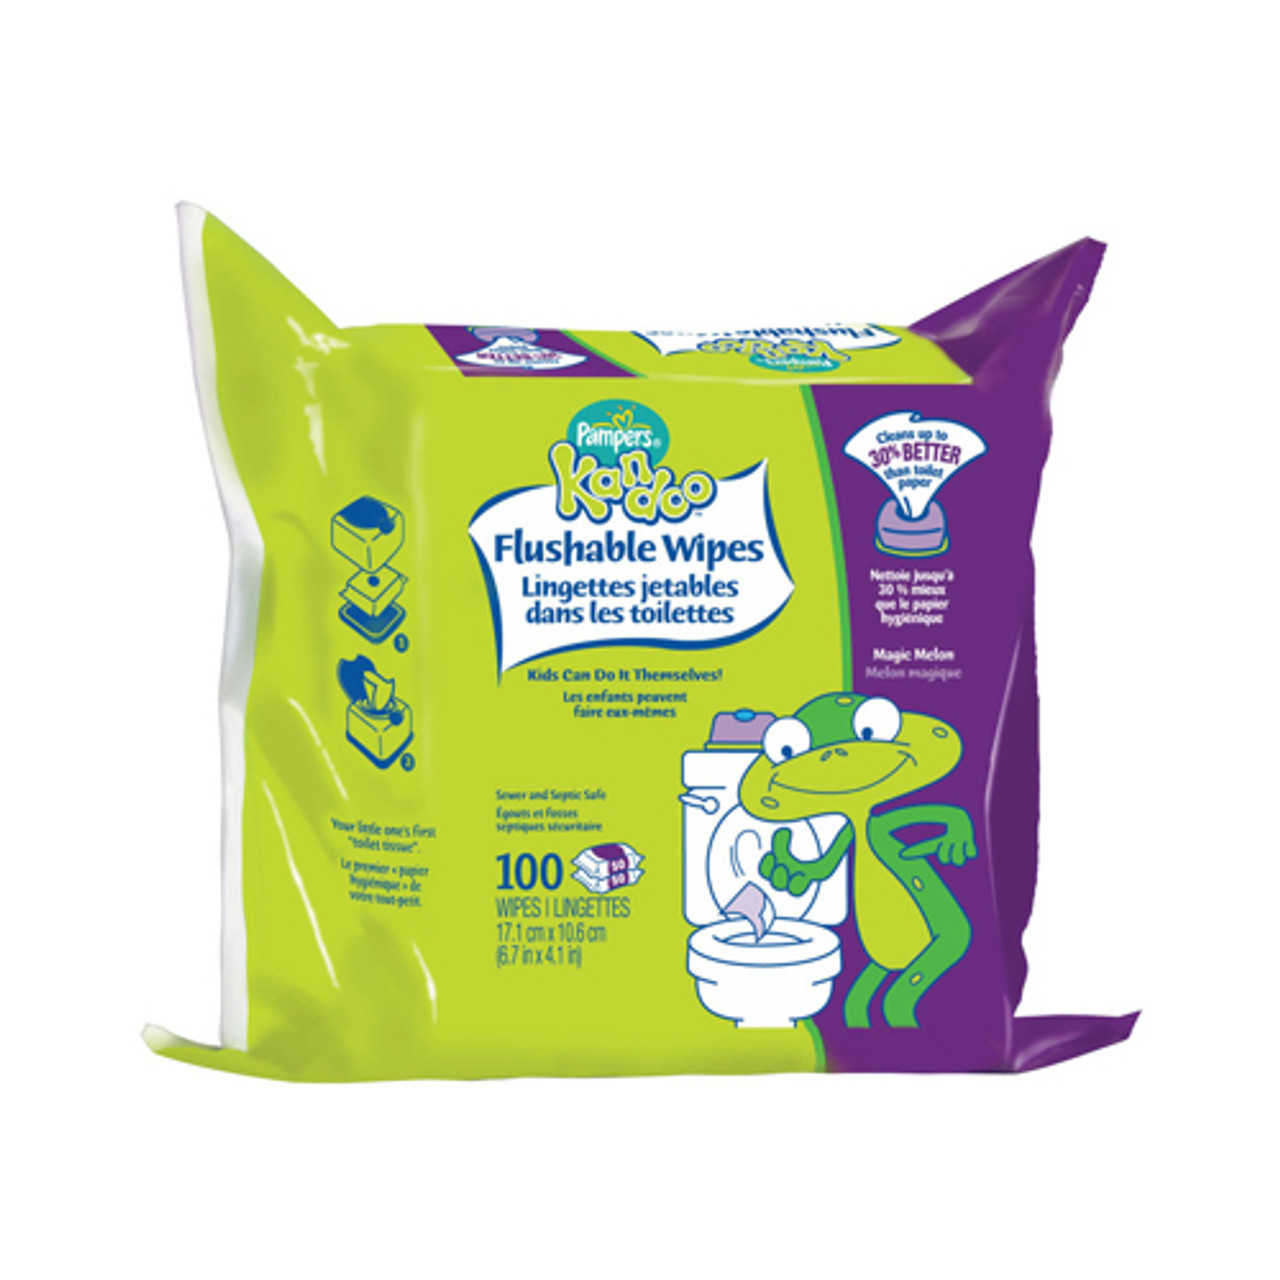 Kandoo Malta - The Kandoo tub not only keeps your wipes clean & moist but  their special design makes it easier for little hands to use & easily  dispense!